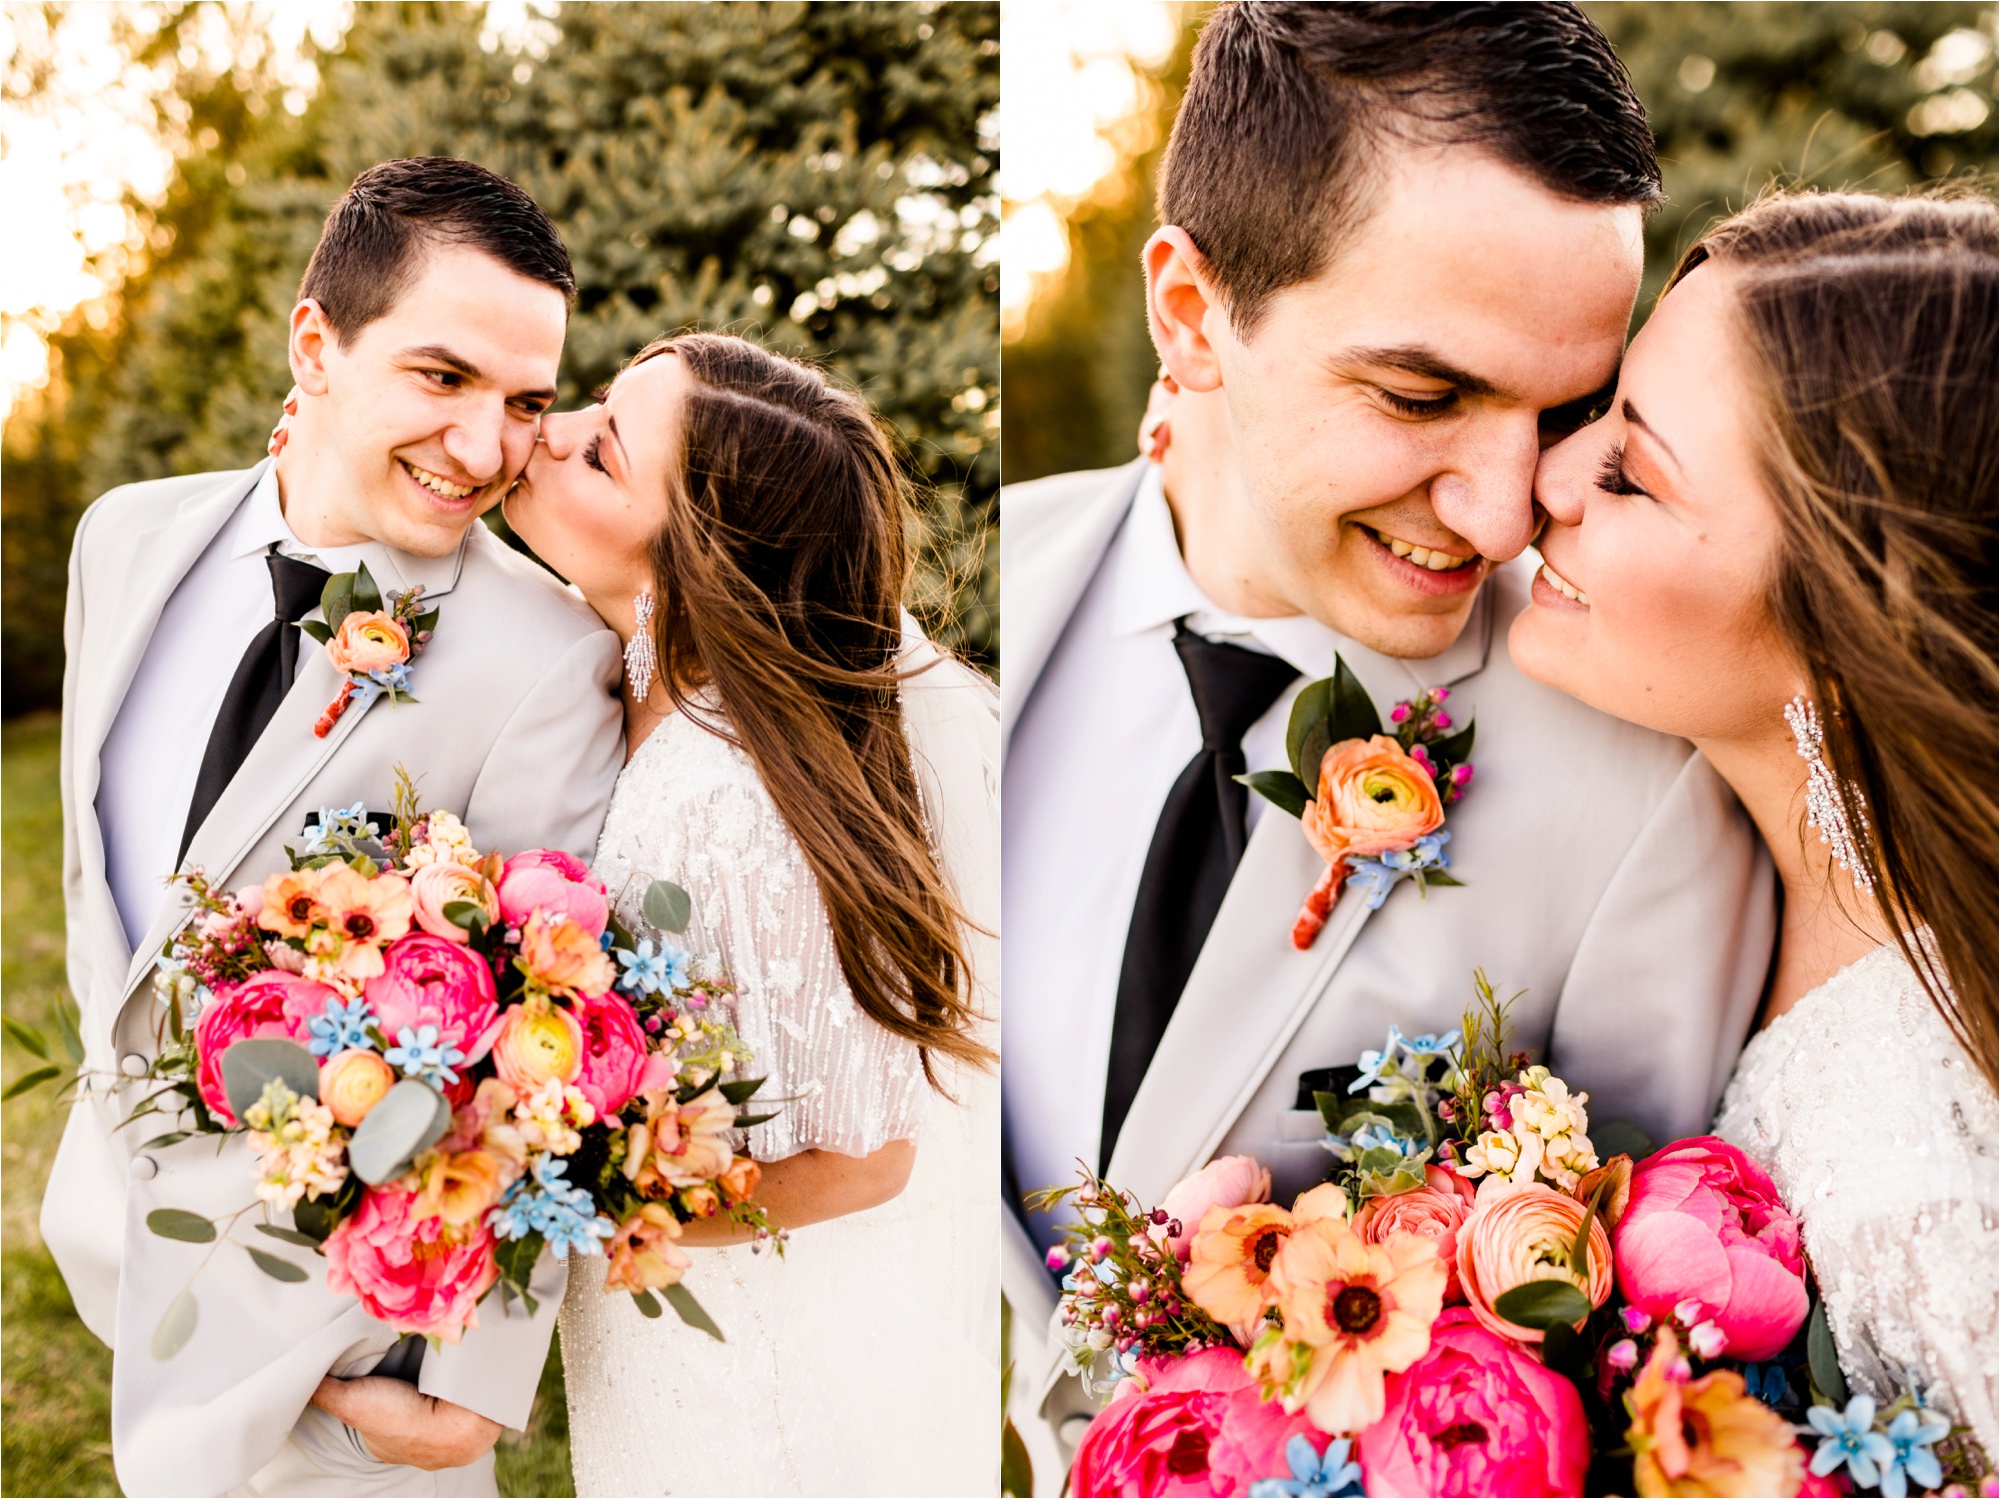 Caitlin and Luke Photography, Illinois Wedding Photographers, Champaign Wedding Photographers, Bloomington Normal Wedding Photographers, Romantic Red and Pink Sunset Styled Shoot_9577.jpg